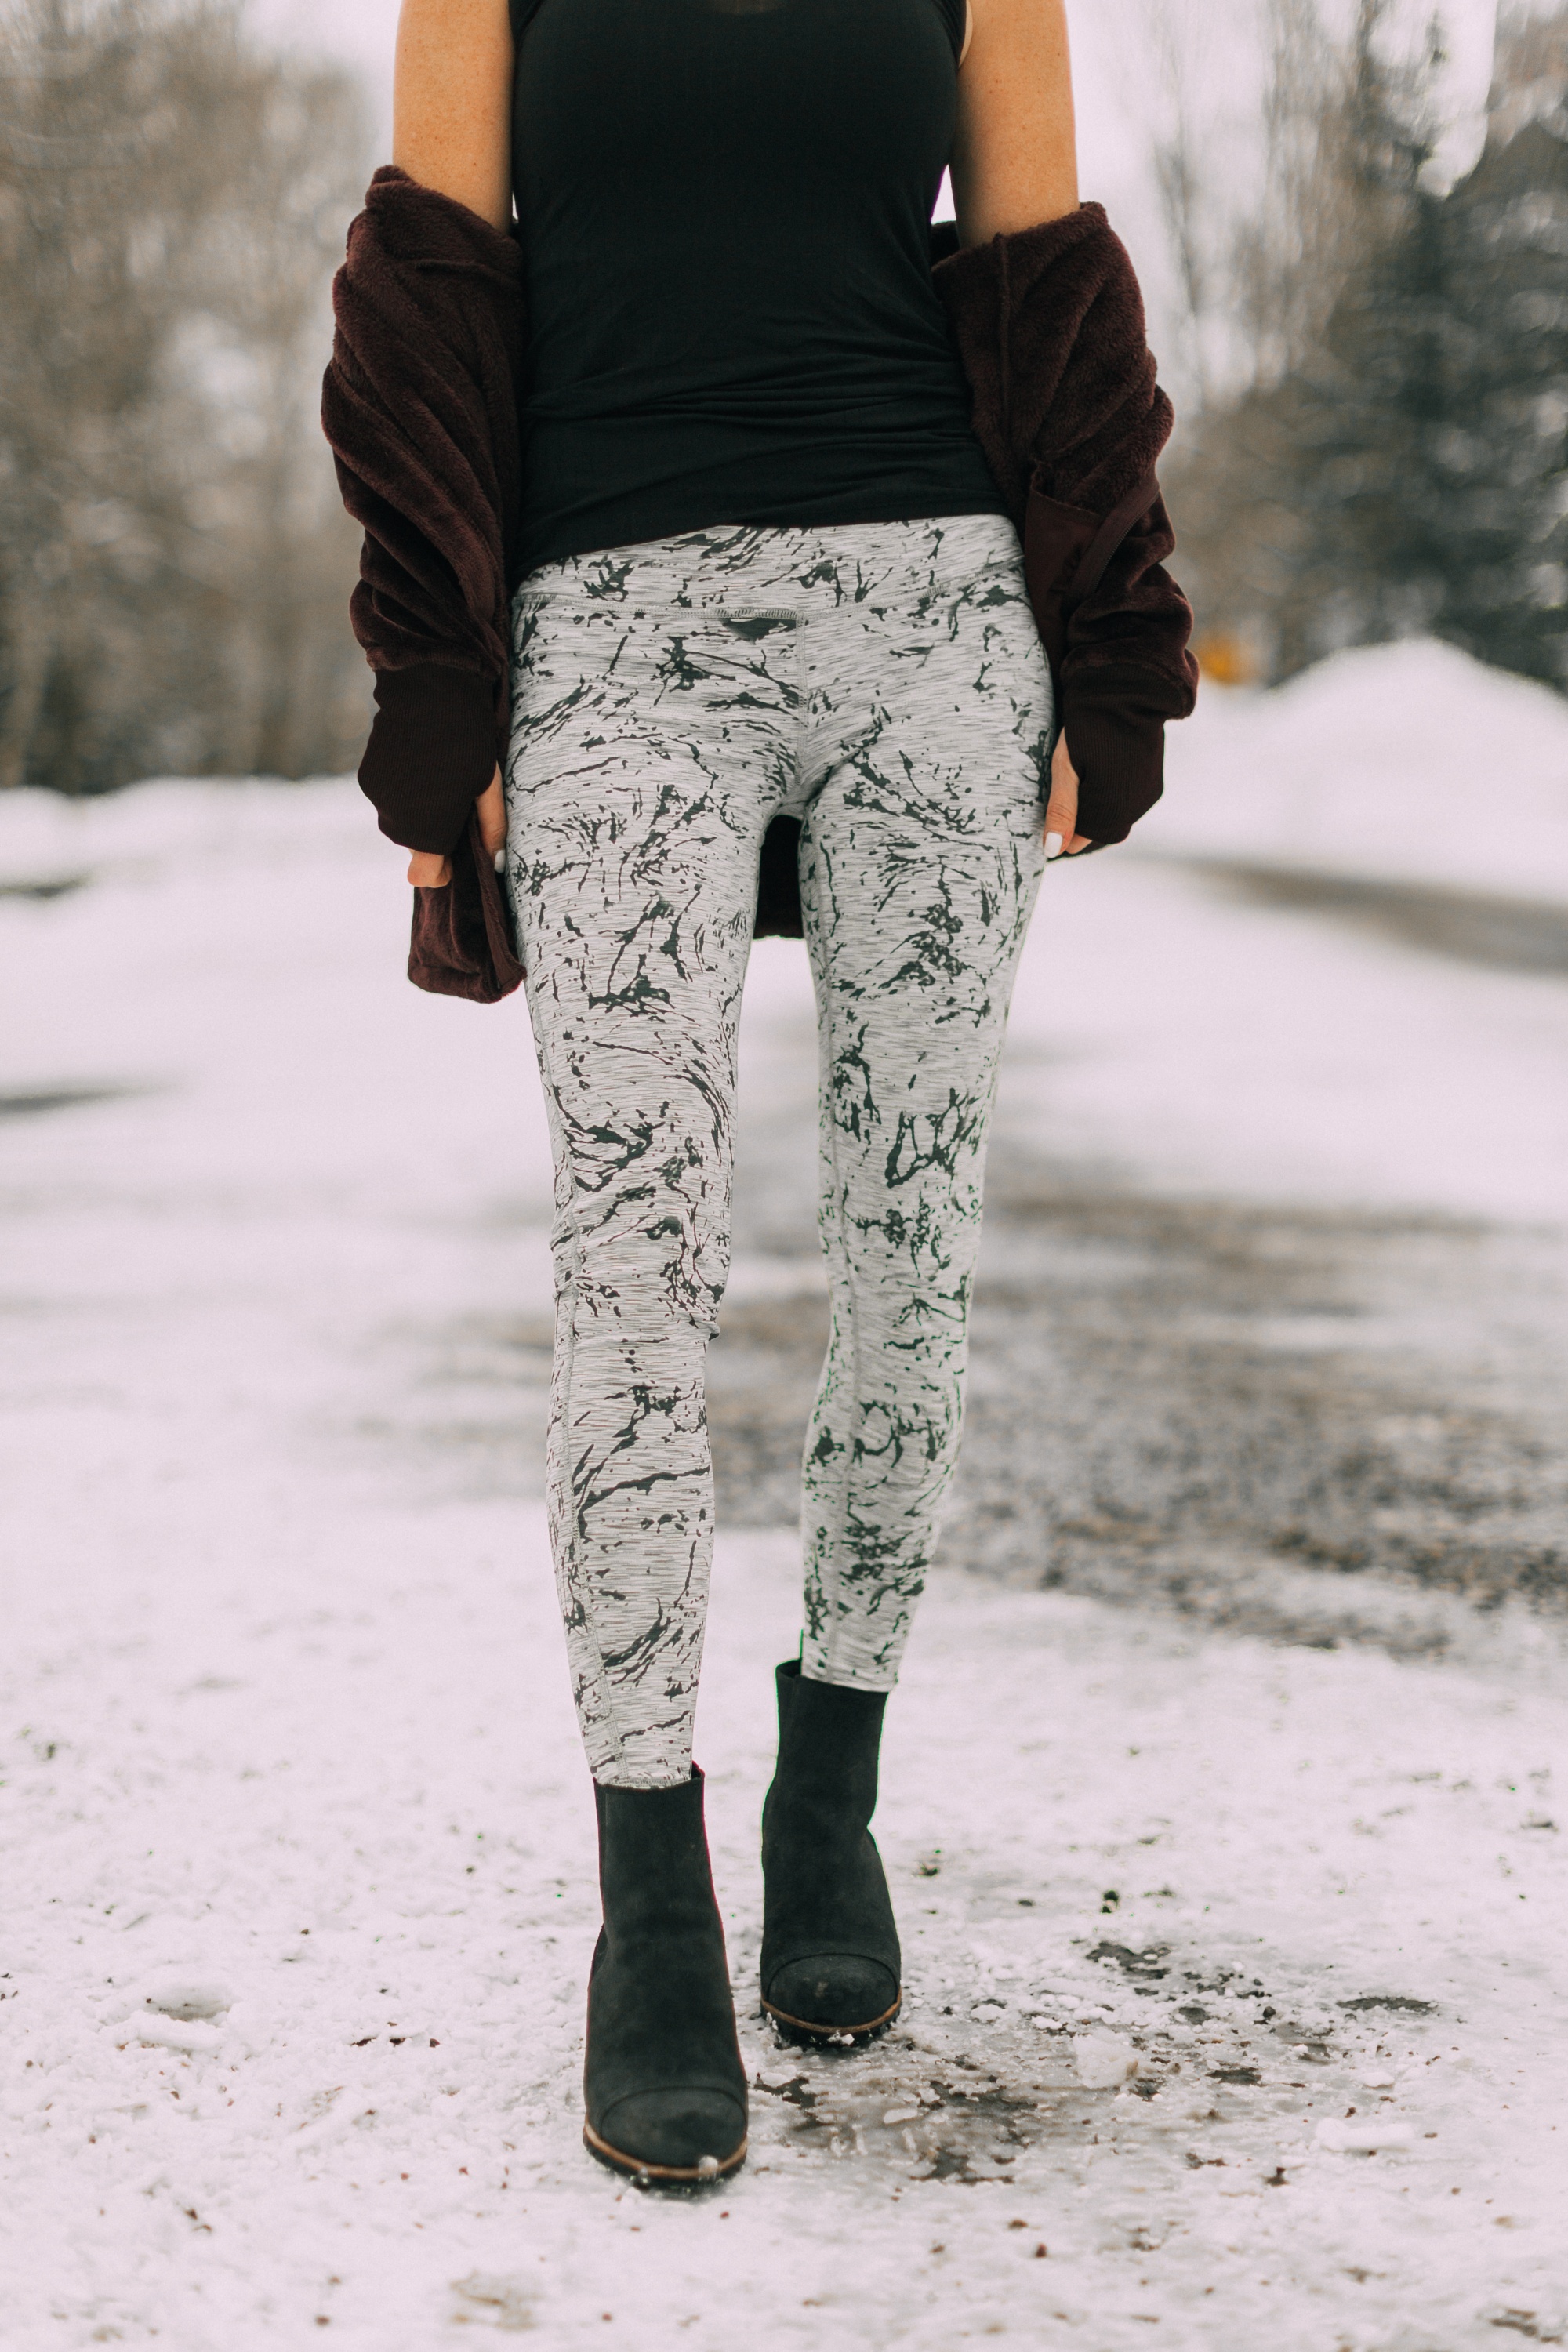 Affordable Reversible Legging, featuring reversible marble printed leggings, breathable tank, and fleece jacket from Jockey worn by fashion blogger over 40, Erin Busbee of BusbeeStyle.com in Telluride, CO